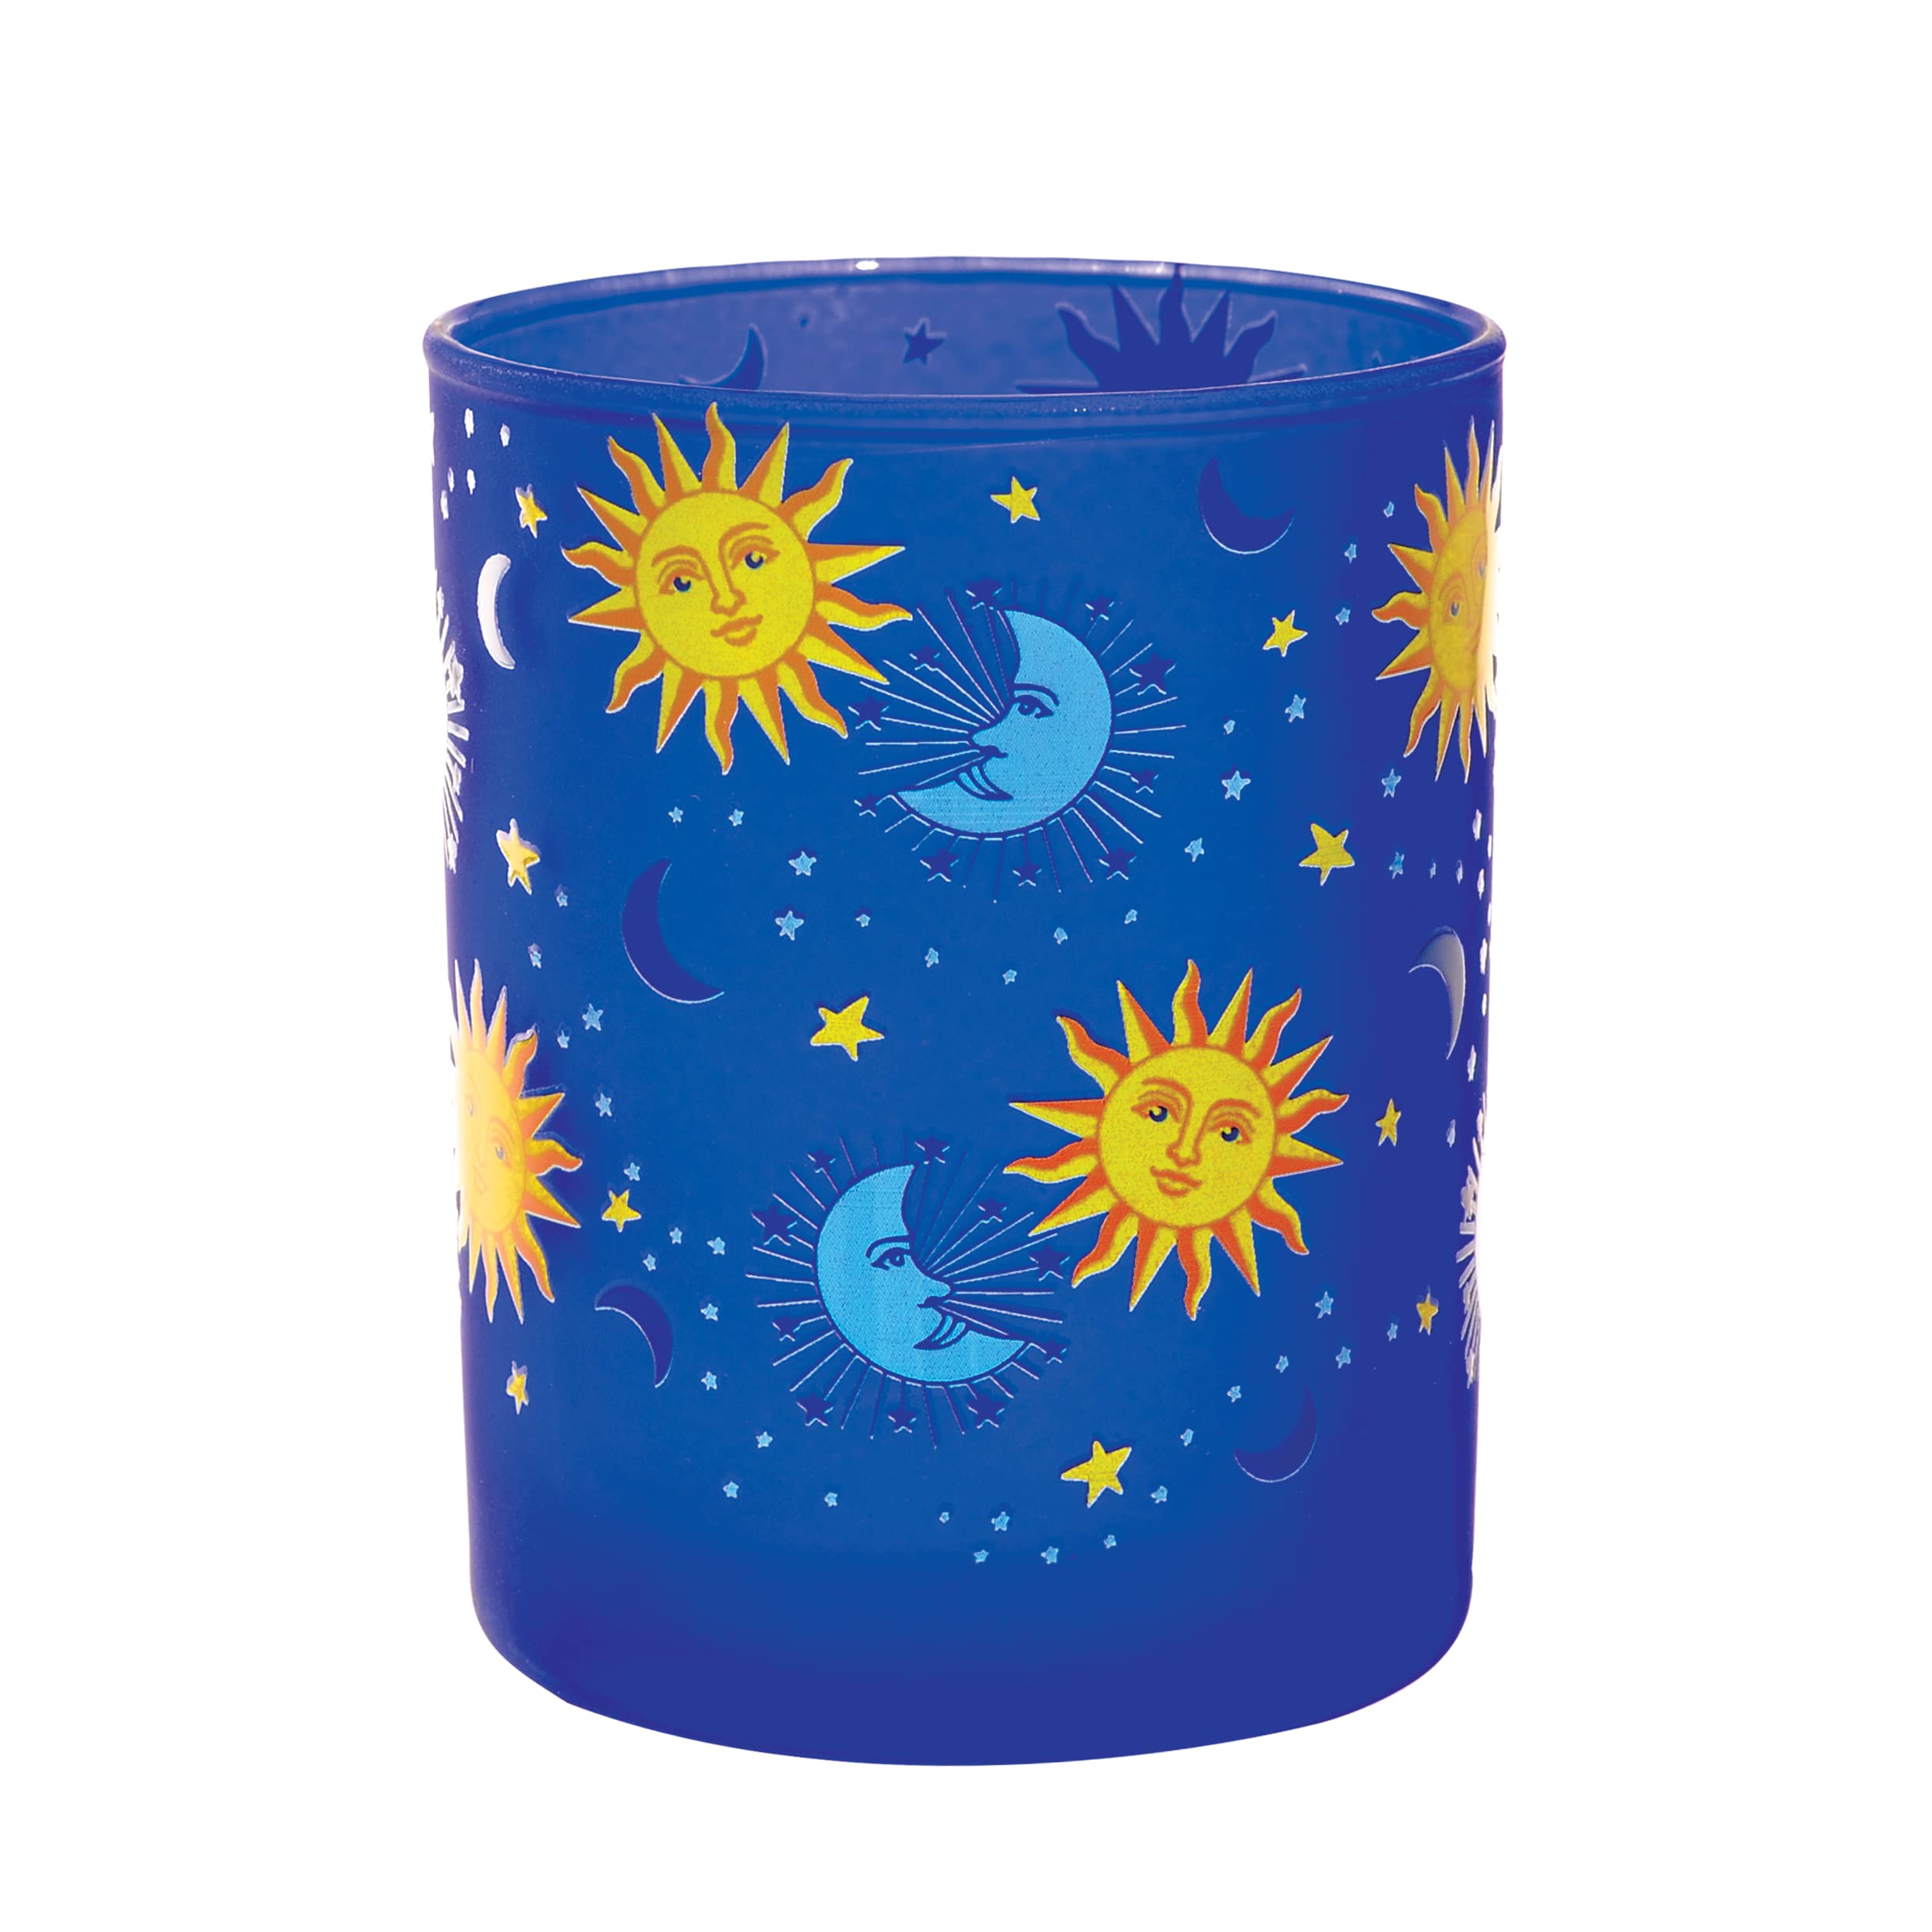 Culver Celestial Frosted Double Old Fashioned Tumbler Glasses, 13.5-Ounce, Gift Boxed Set of 2 (Celestial Sun Moon Stars Blue Frosted)